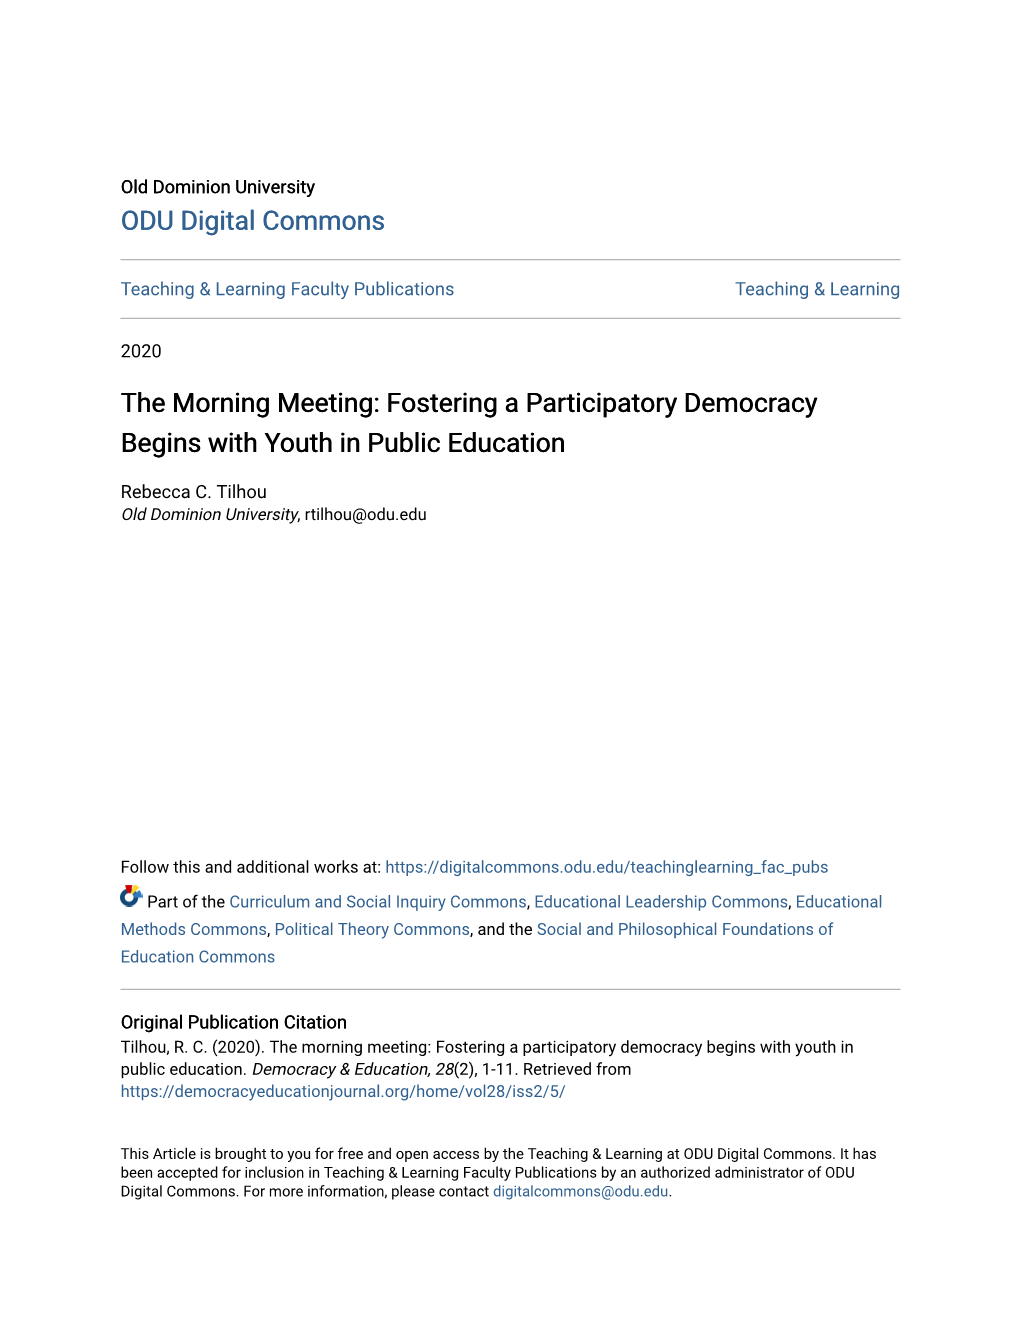 The Morning Meeting: Fostering a Participatory Democracy Begins with Youth in Public Education